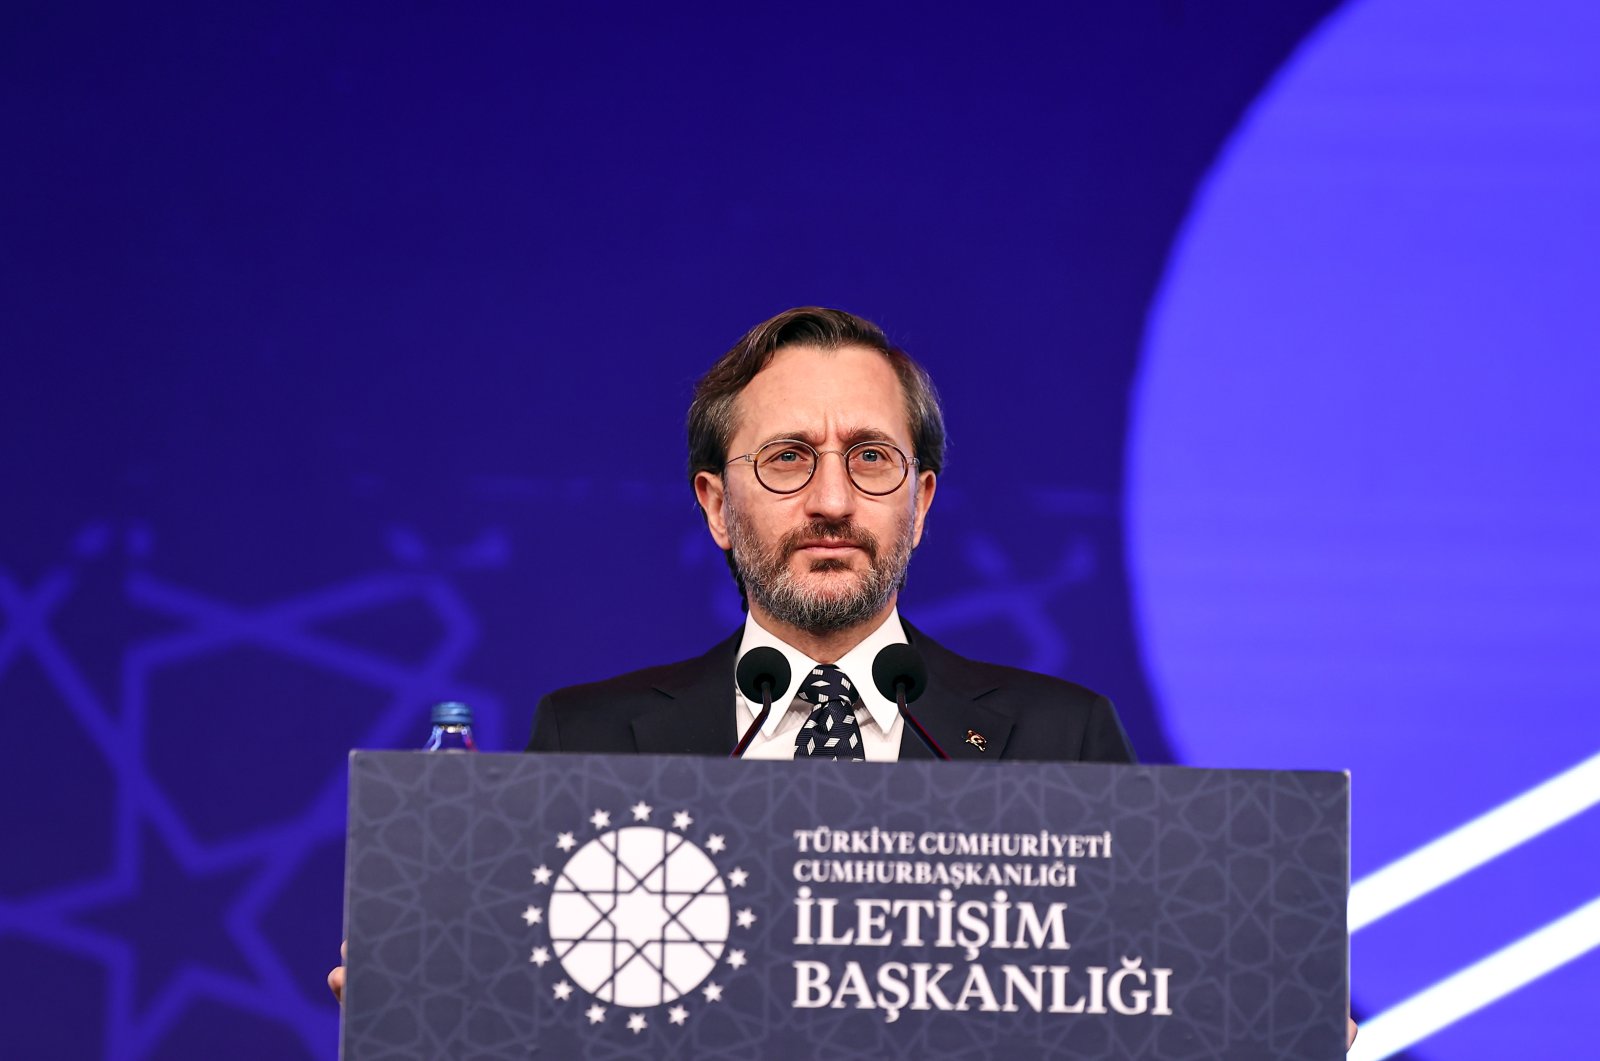 Turkey&#039;s Presidential Communications Director Fahrettin Altun speaks at the joint opening meeting of the &quot;National Strategic Communication Policy&quot; and &quot;Combating Disinformation&quot; workshops, Istanbul, Turkey, Dec. 26, 2021. (AA Photo)